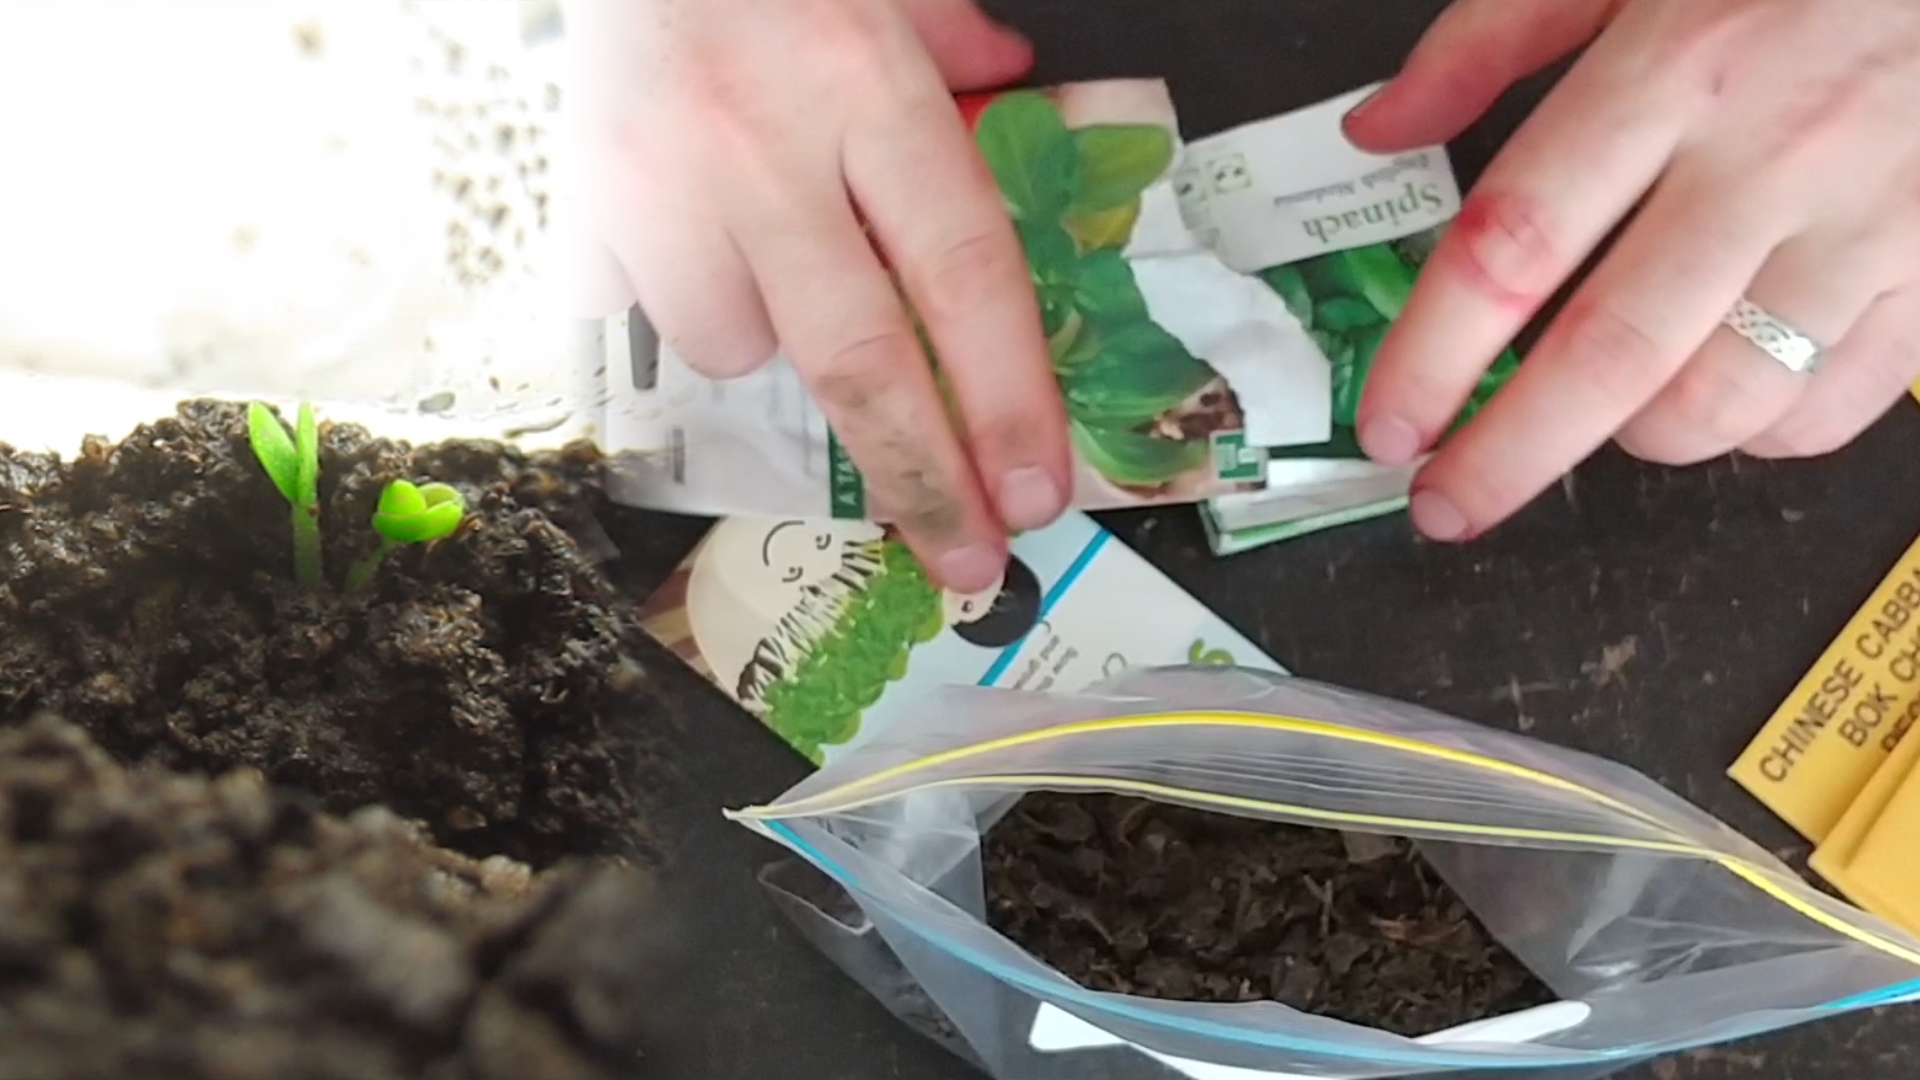 Indoor gardening - create a microclimate dirtbag!